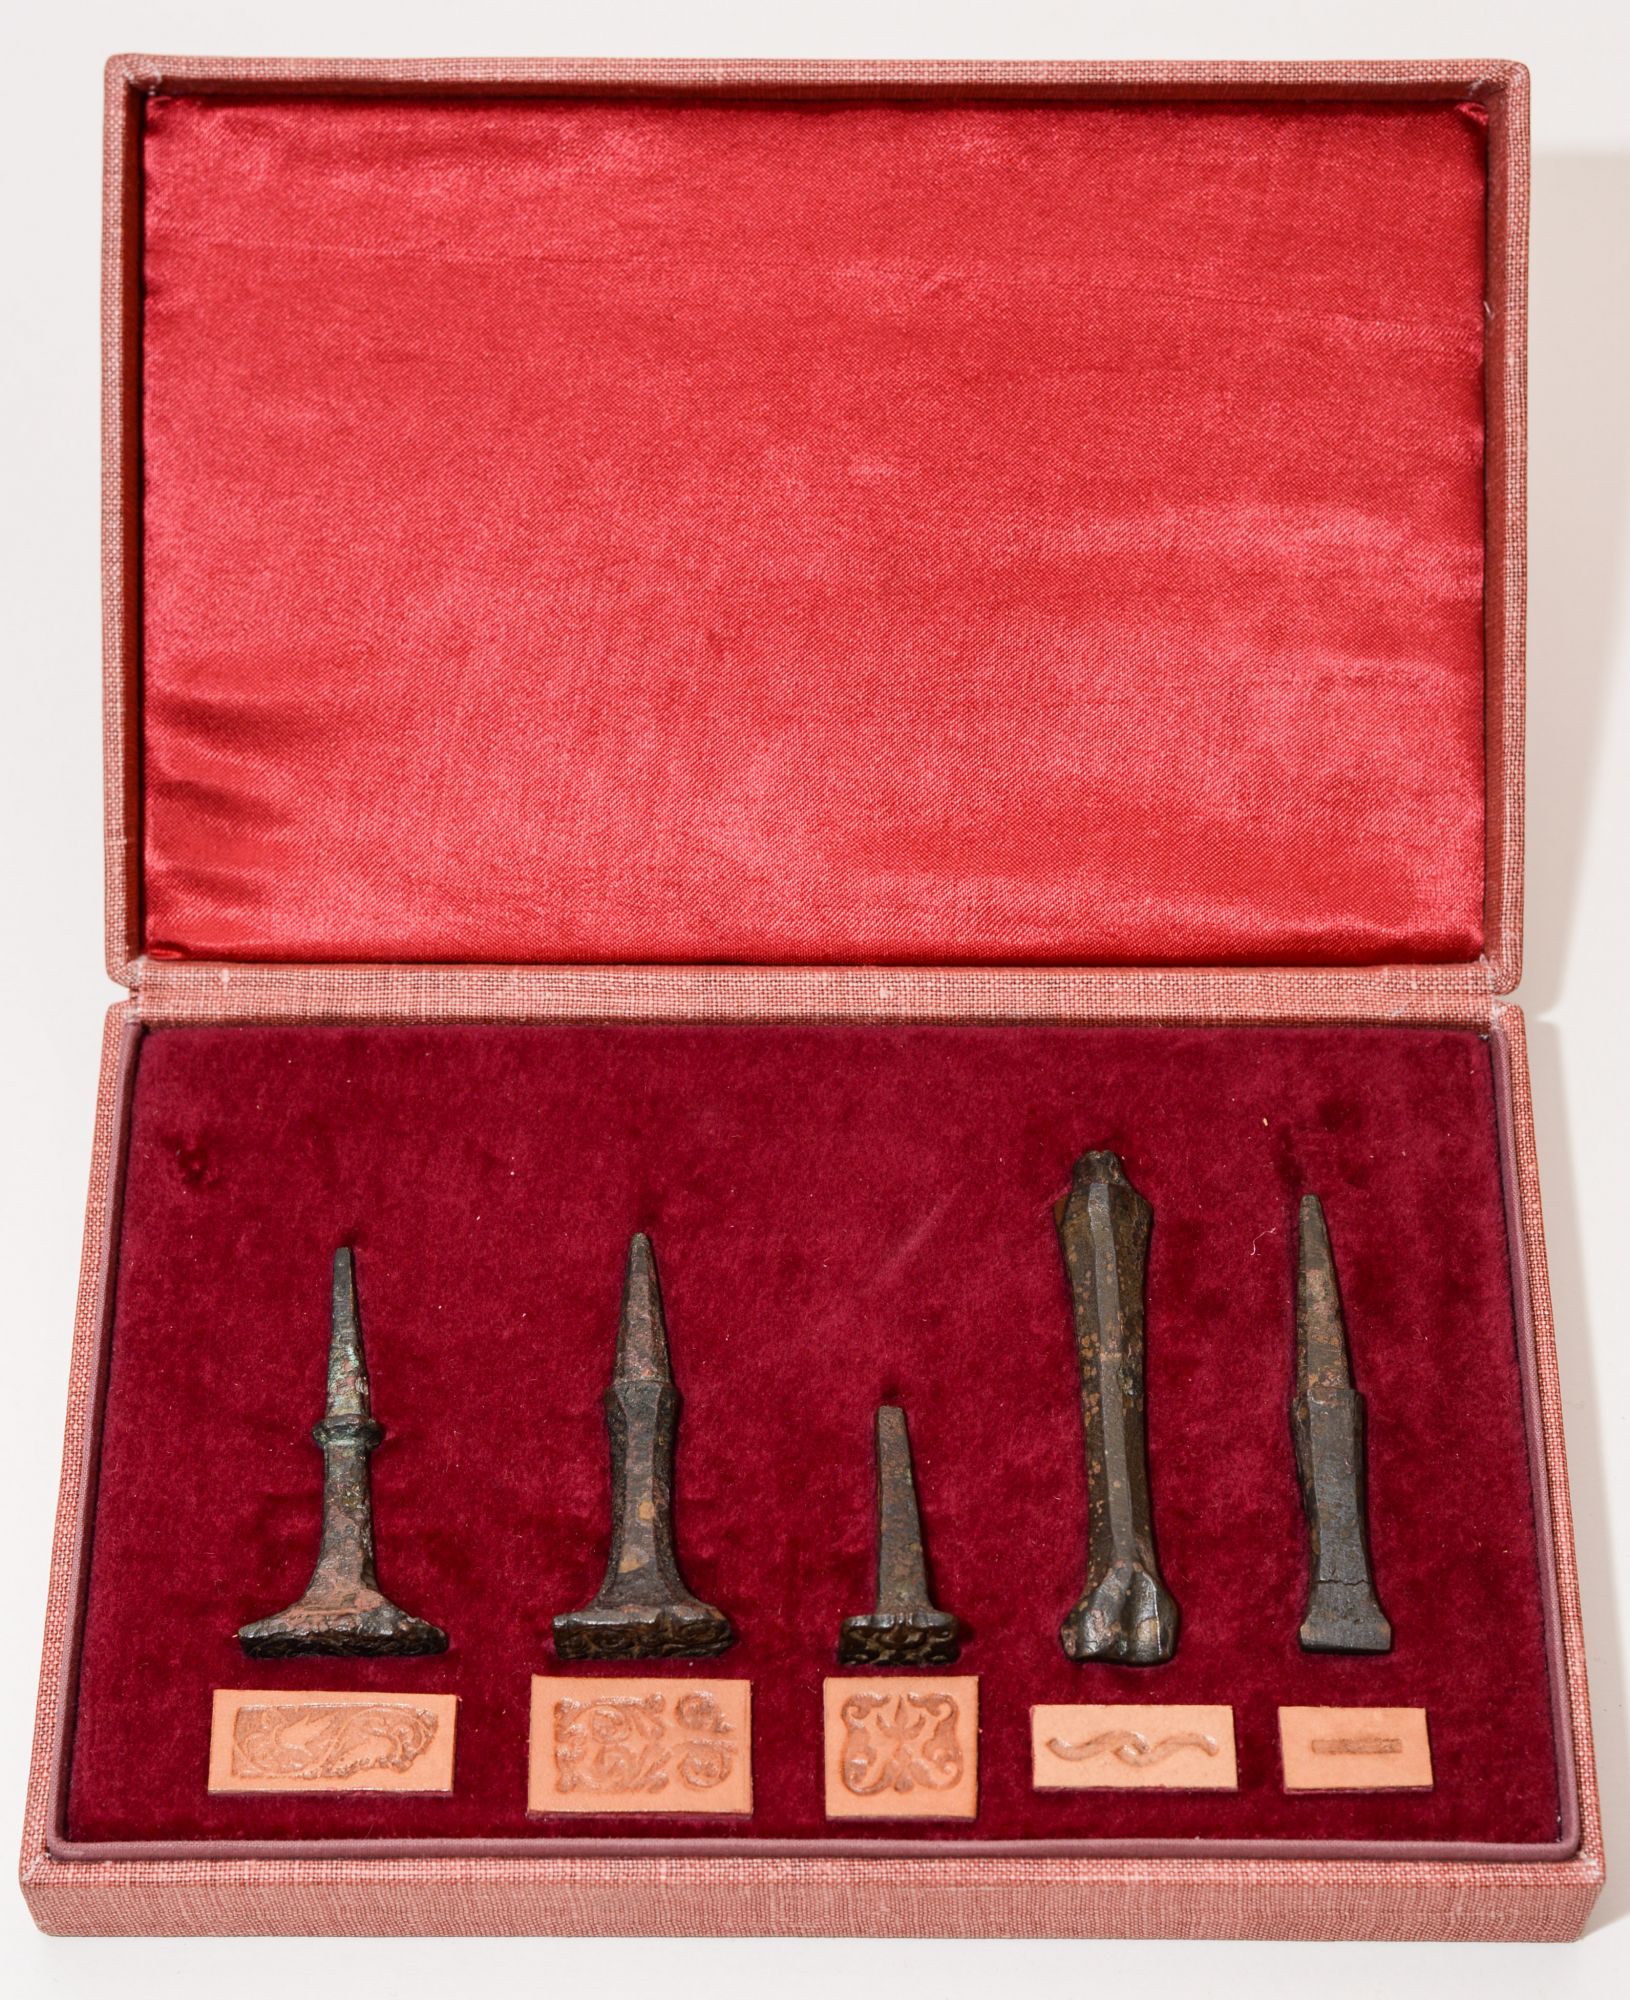 A Collection of Five 16th Century Polish Binding Tools